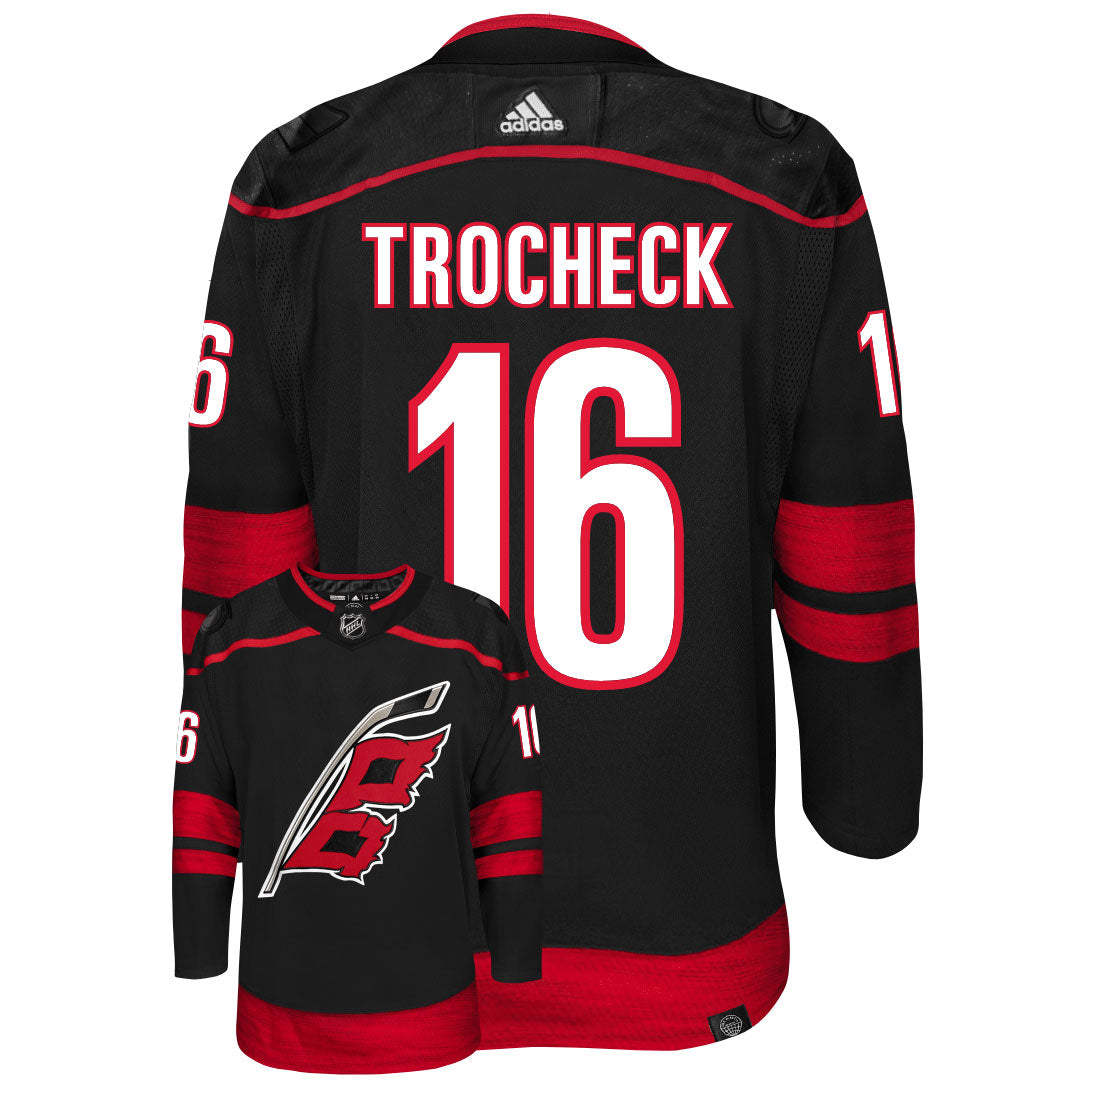 Vincent Trocheck Carolina Hurricanes Adidas Primegreen Authentic Third Alternate NHL Hockey Jersey - Back/Front View